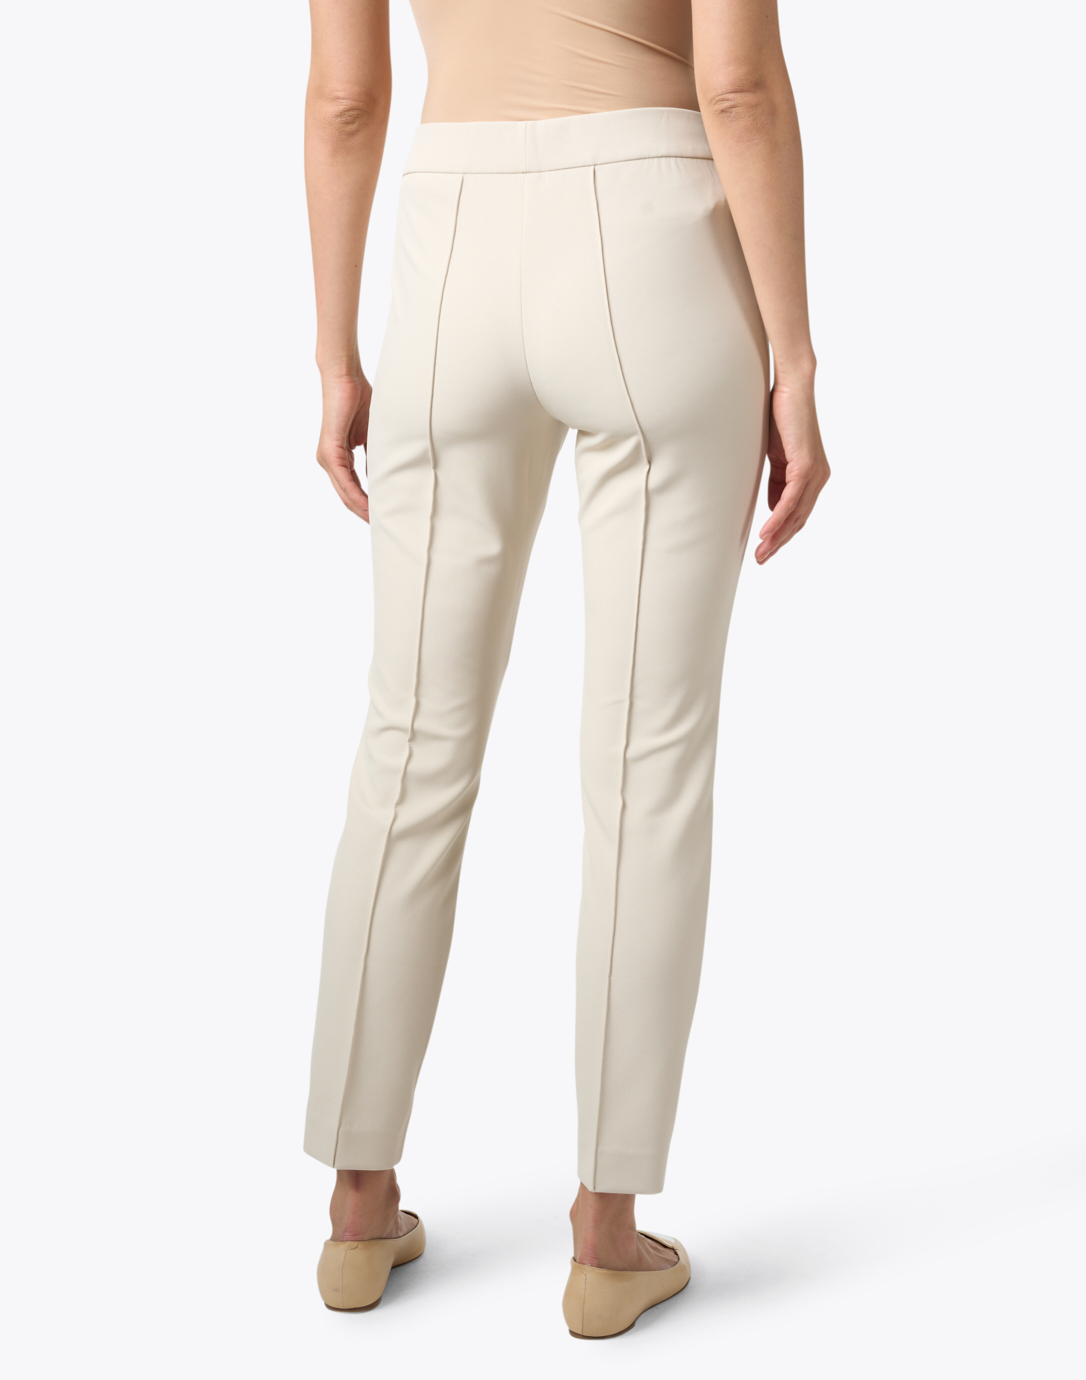 Gramercy Pant in Acclaimed Stretch